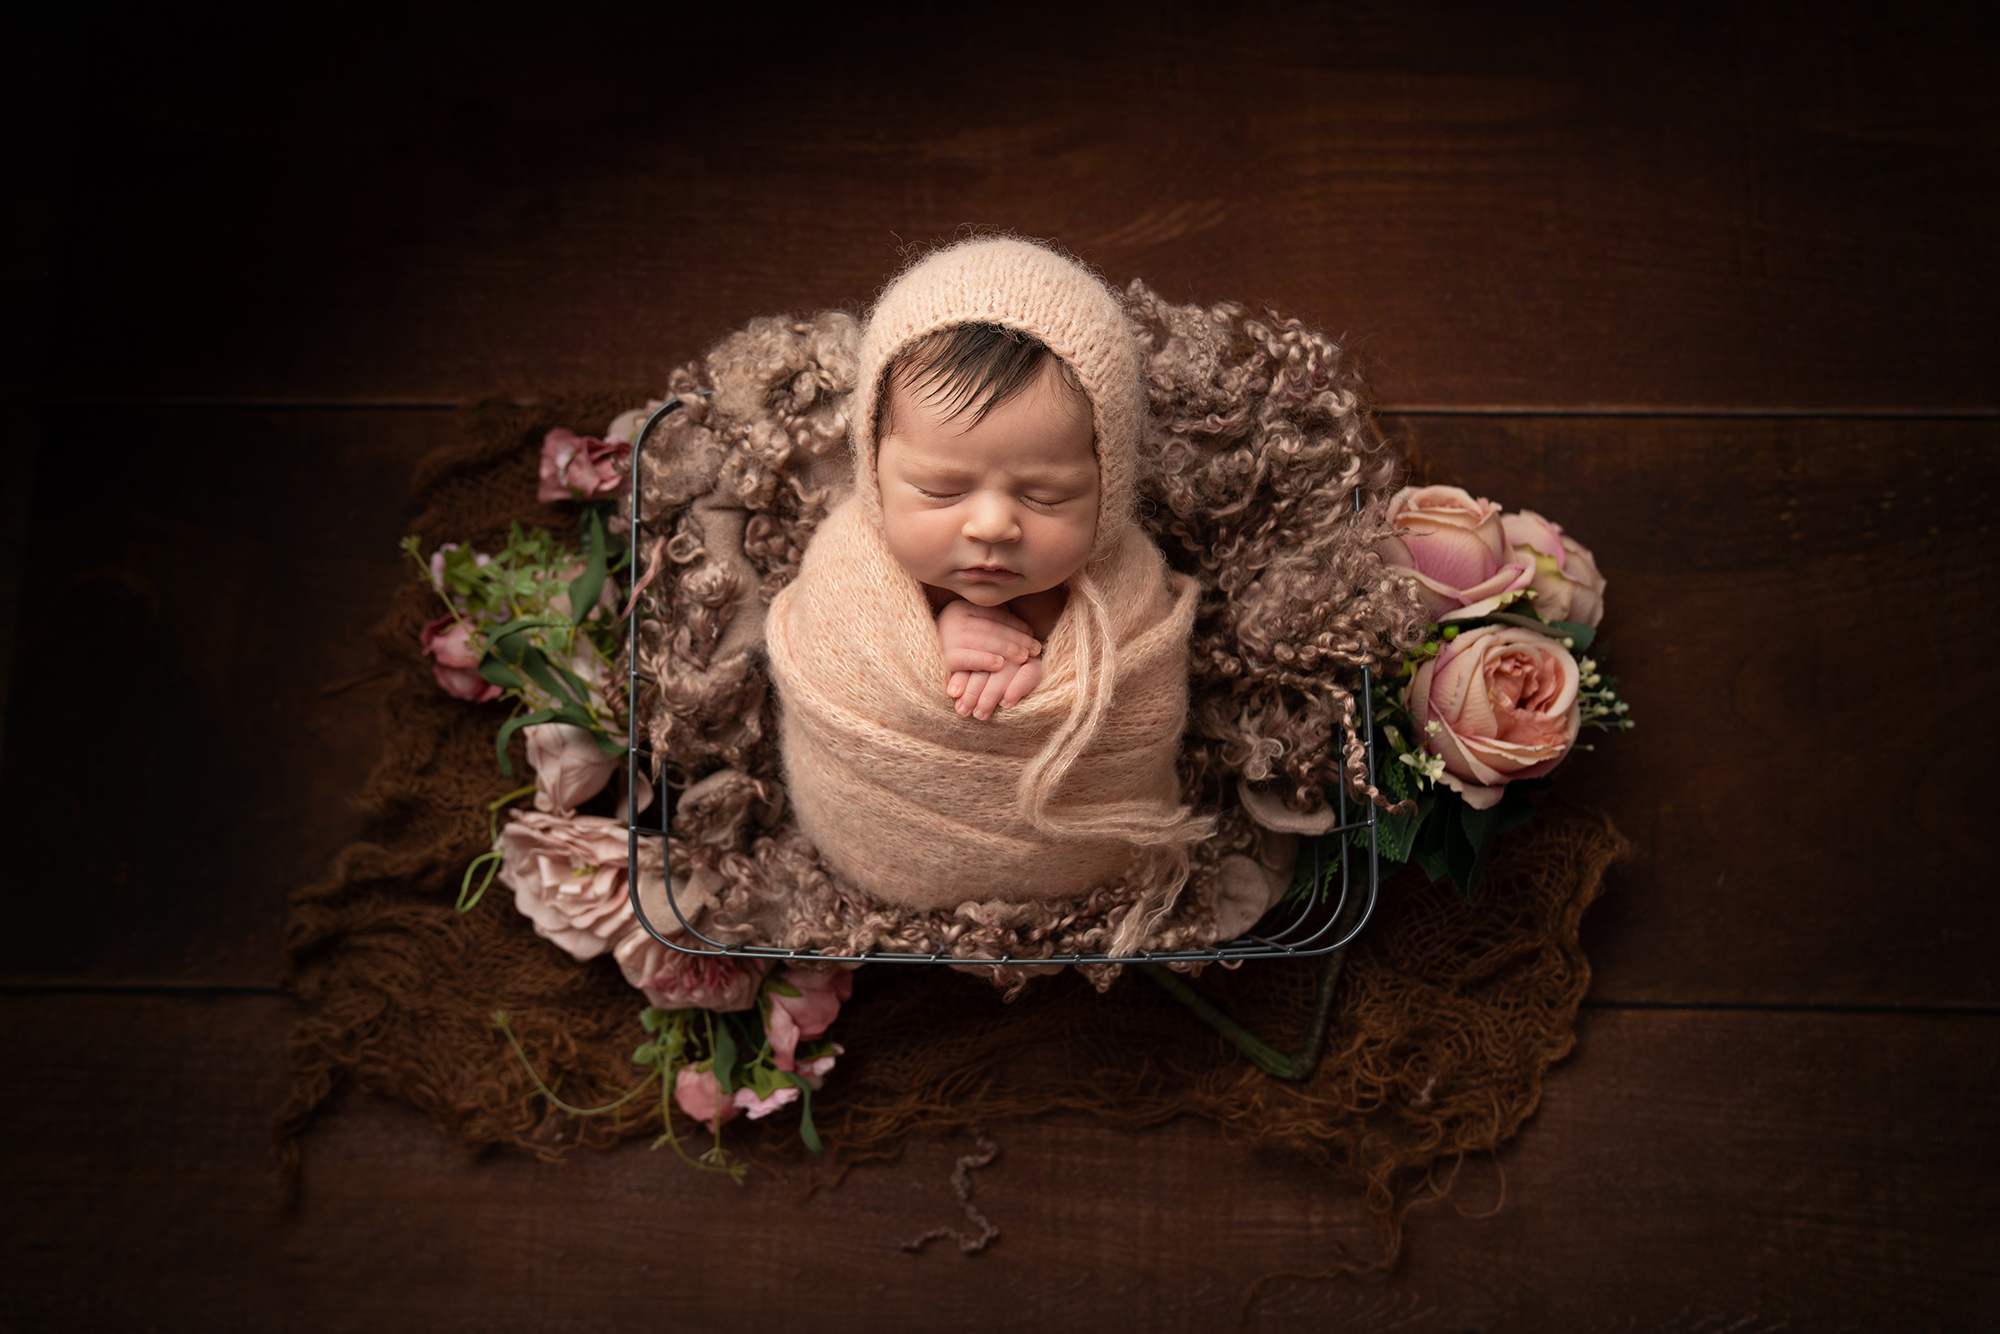 New born baby with flowers